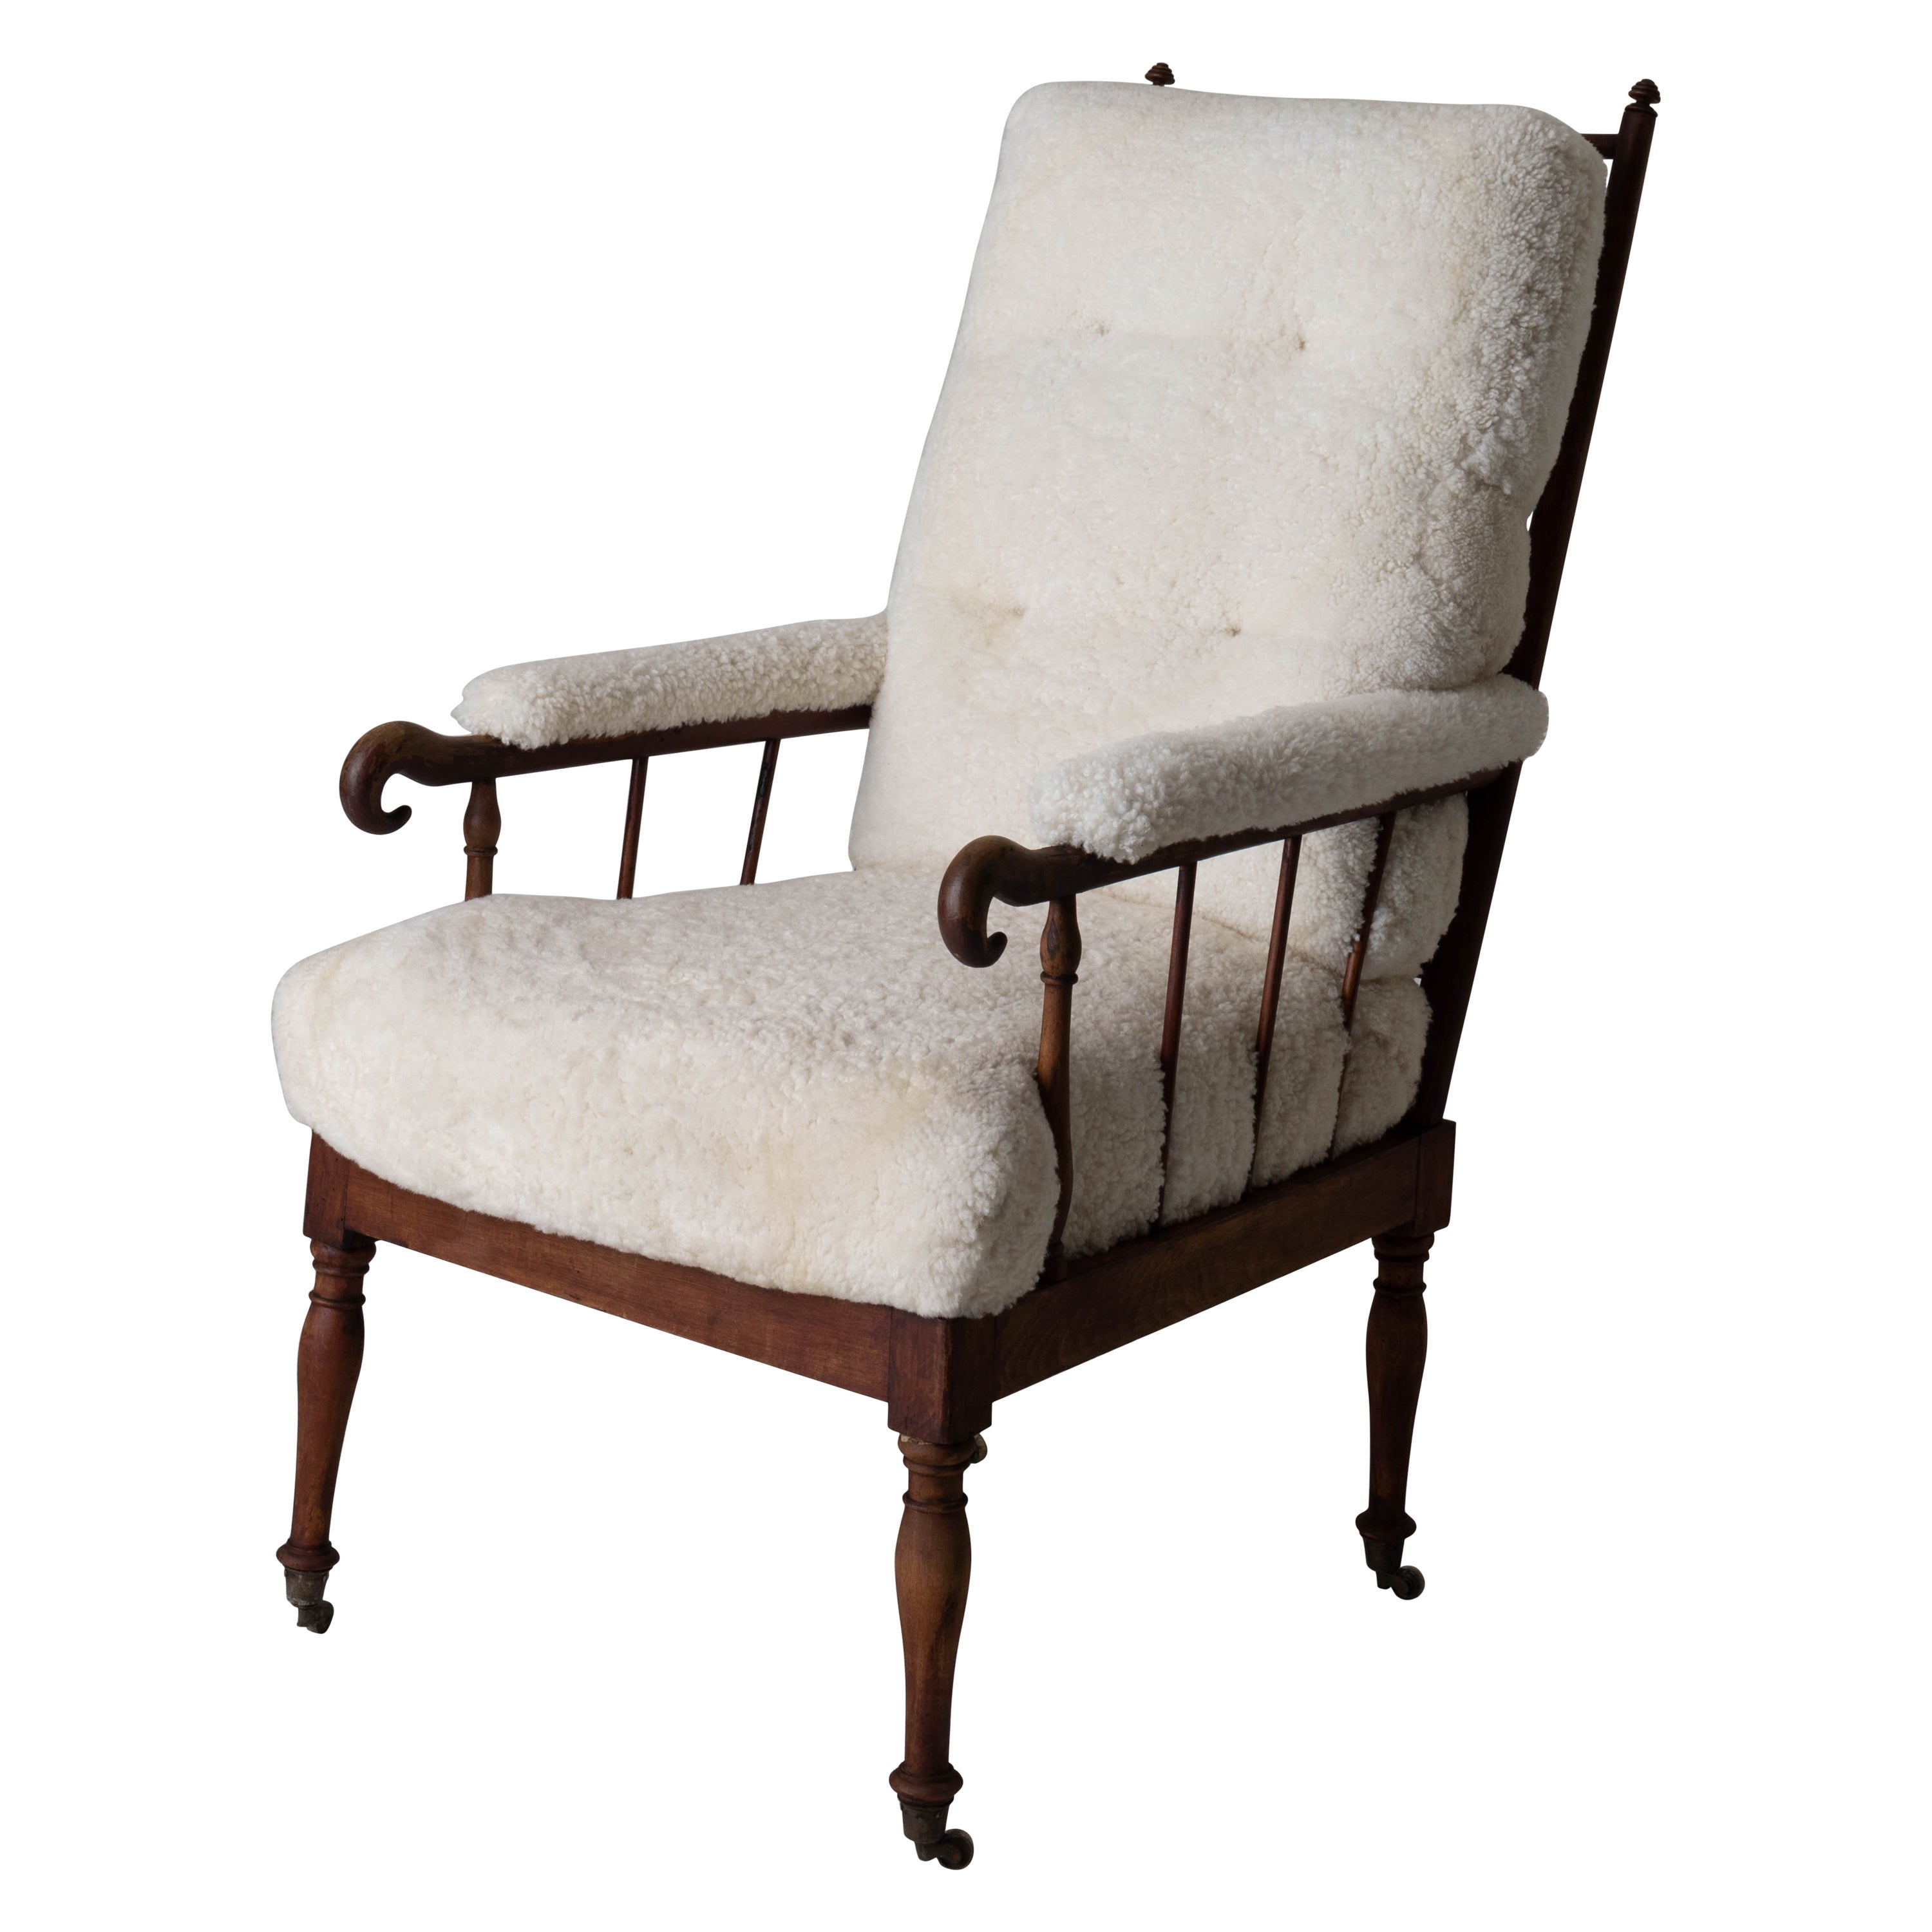 Armchair Tall Back Swedish Shearling White Brown Frame 19th Century Sweden 